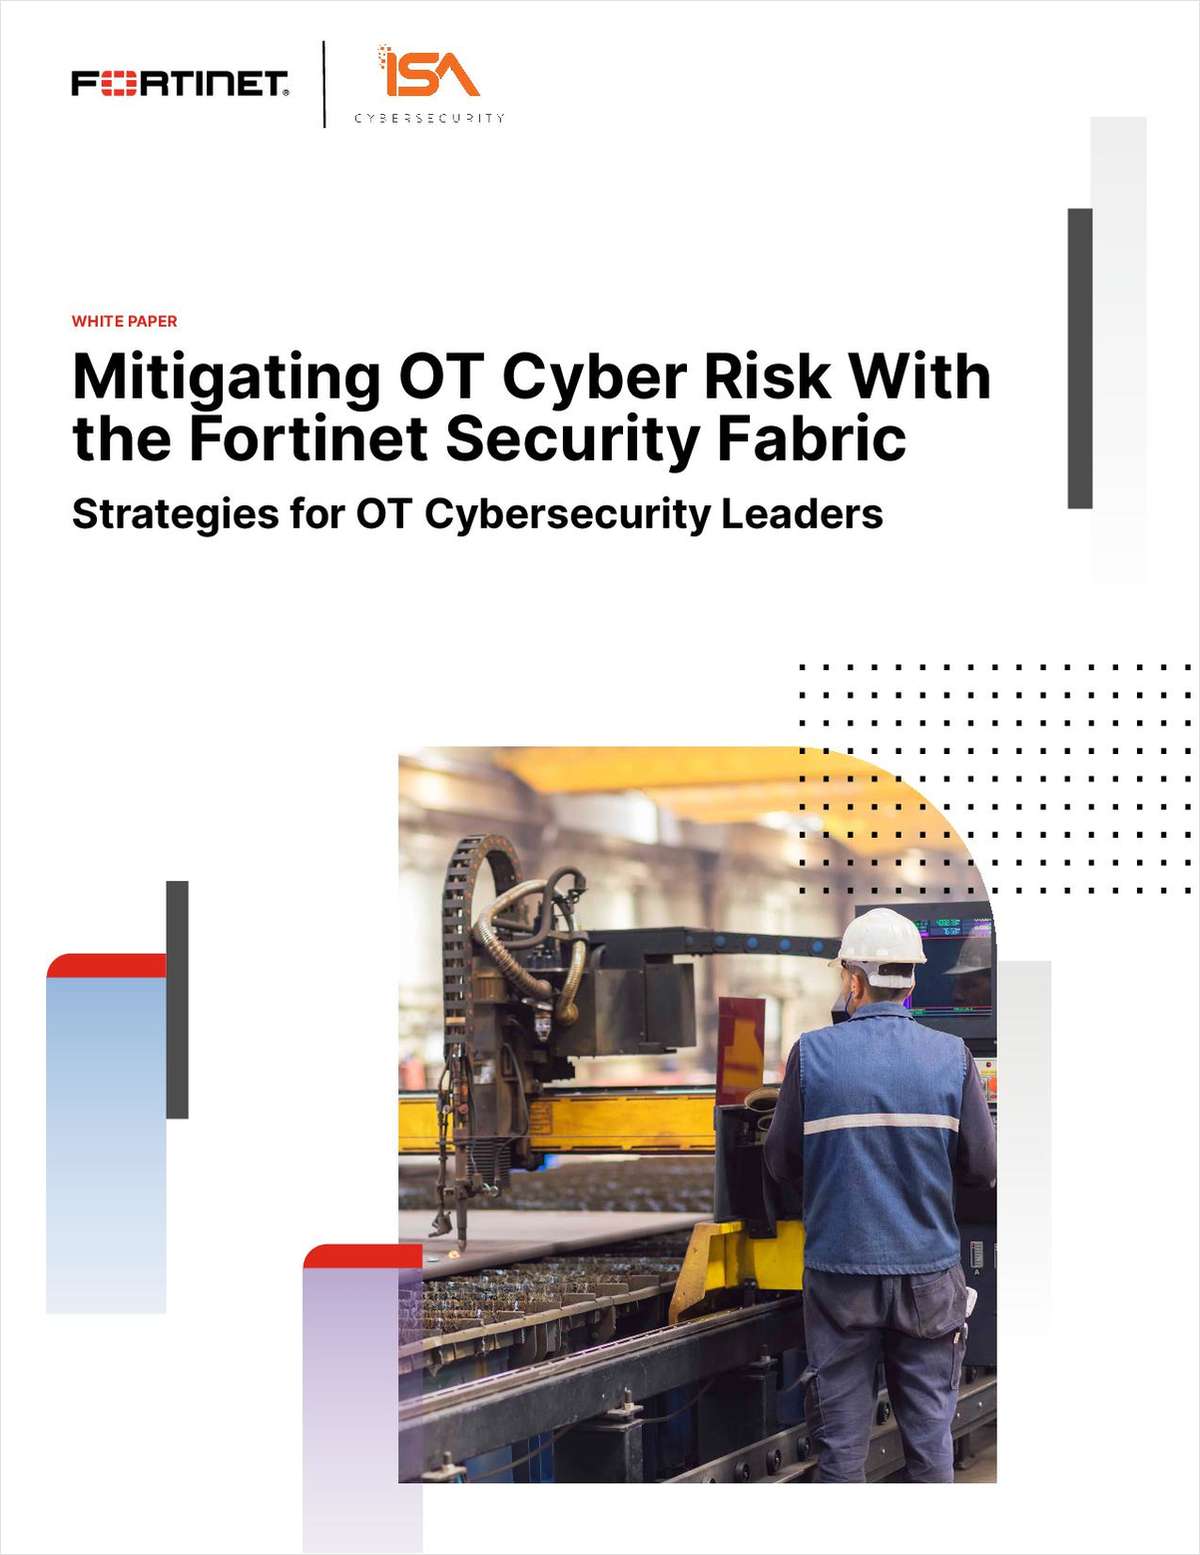 Mitigating OT Cyber Risk Strategies for Cybersecurity Leaders